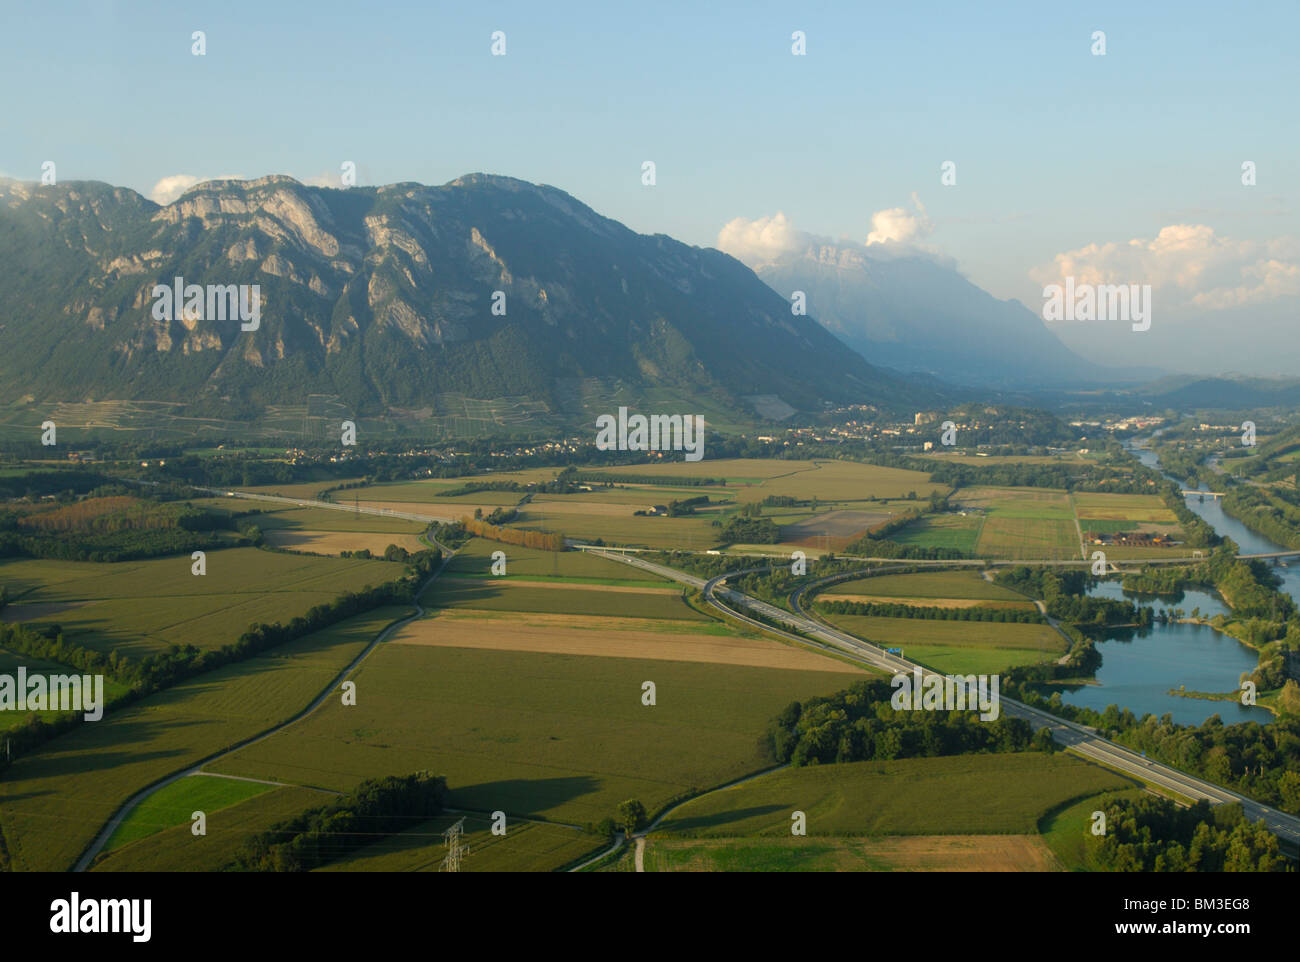 Aerial view of Francin and Combes de Savoie. Right Isere river. Savoy (Savoie), Rhone-Alpes region, French Alps, France Stock Photo